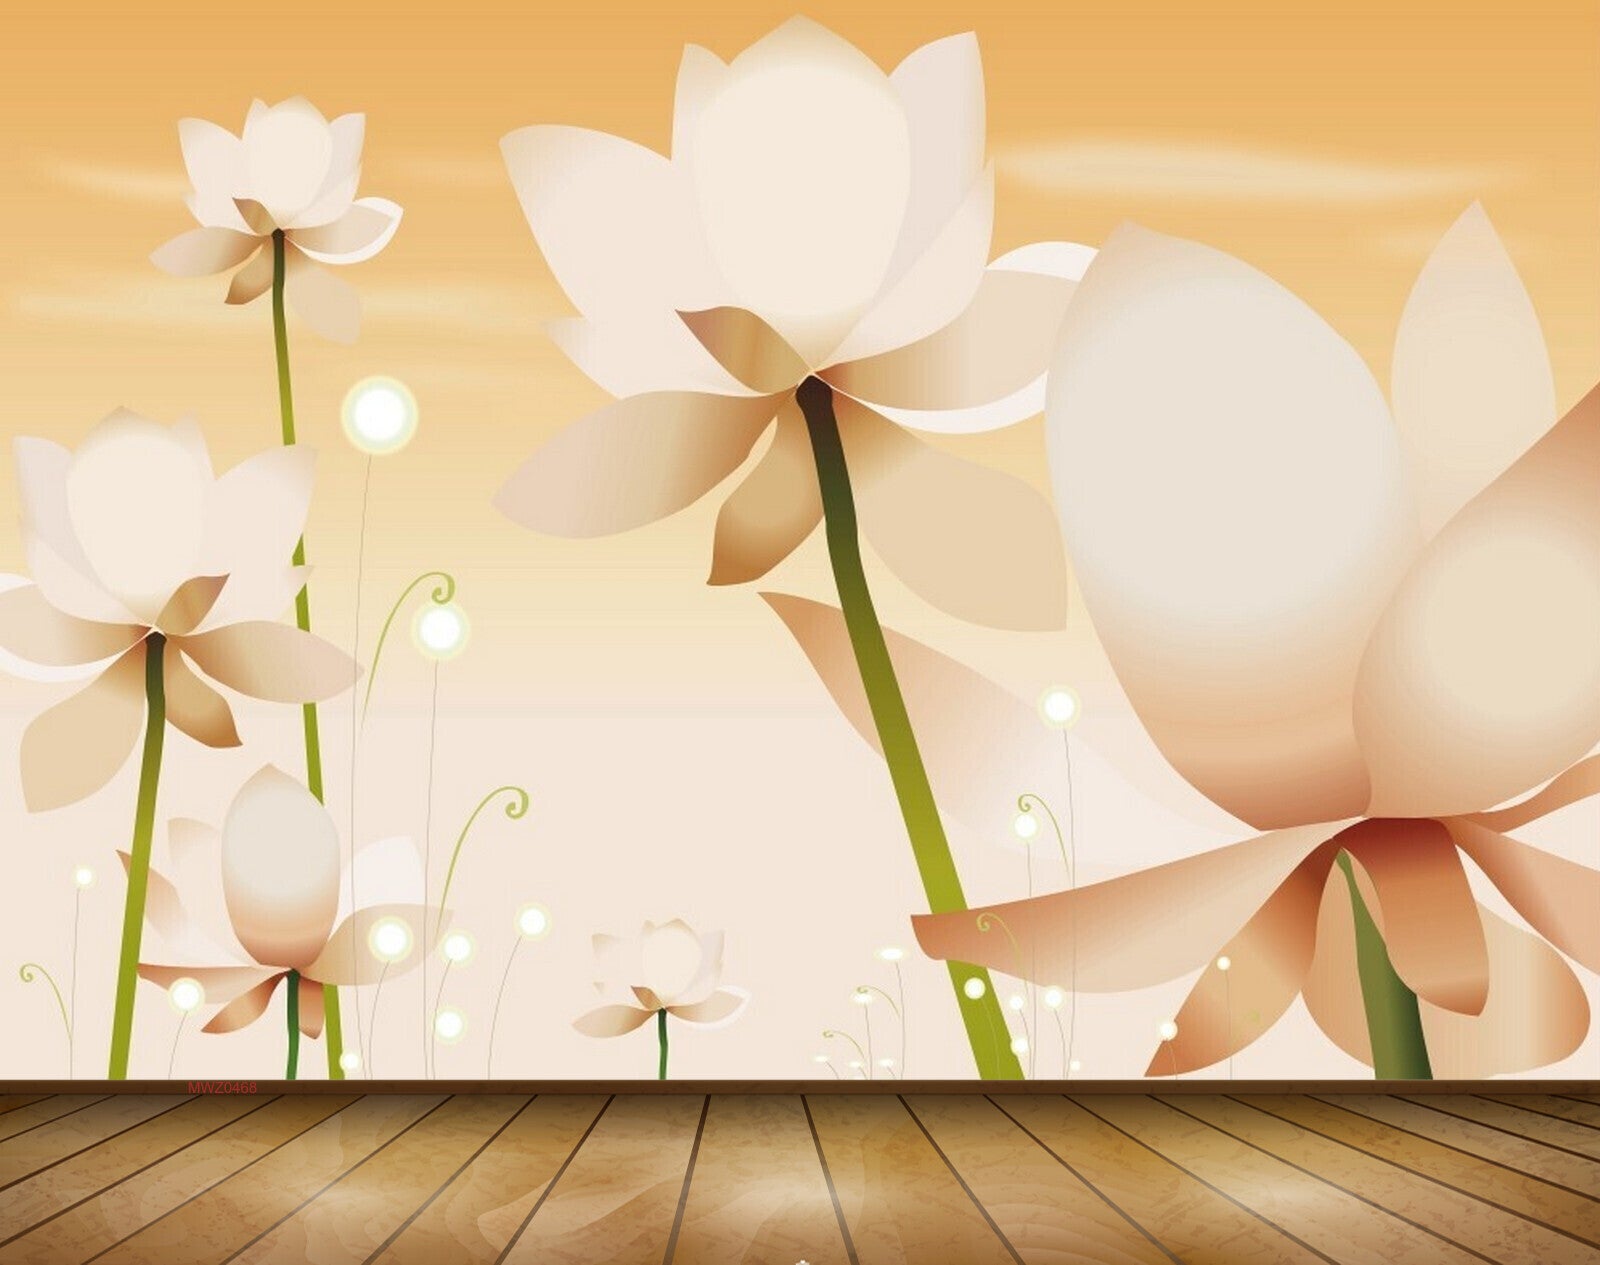 200+] Lotus Flower Backgrounds | Wallpapers.com